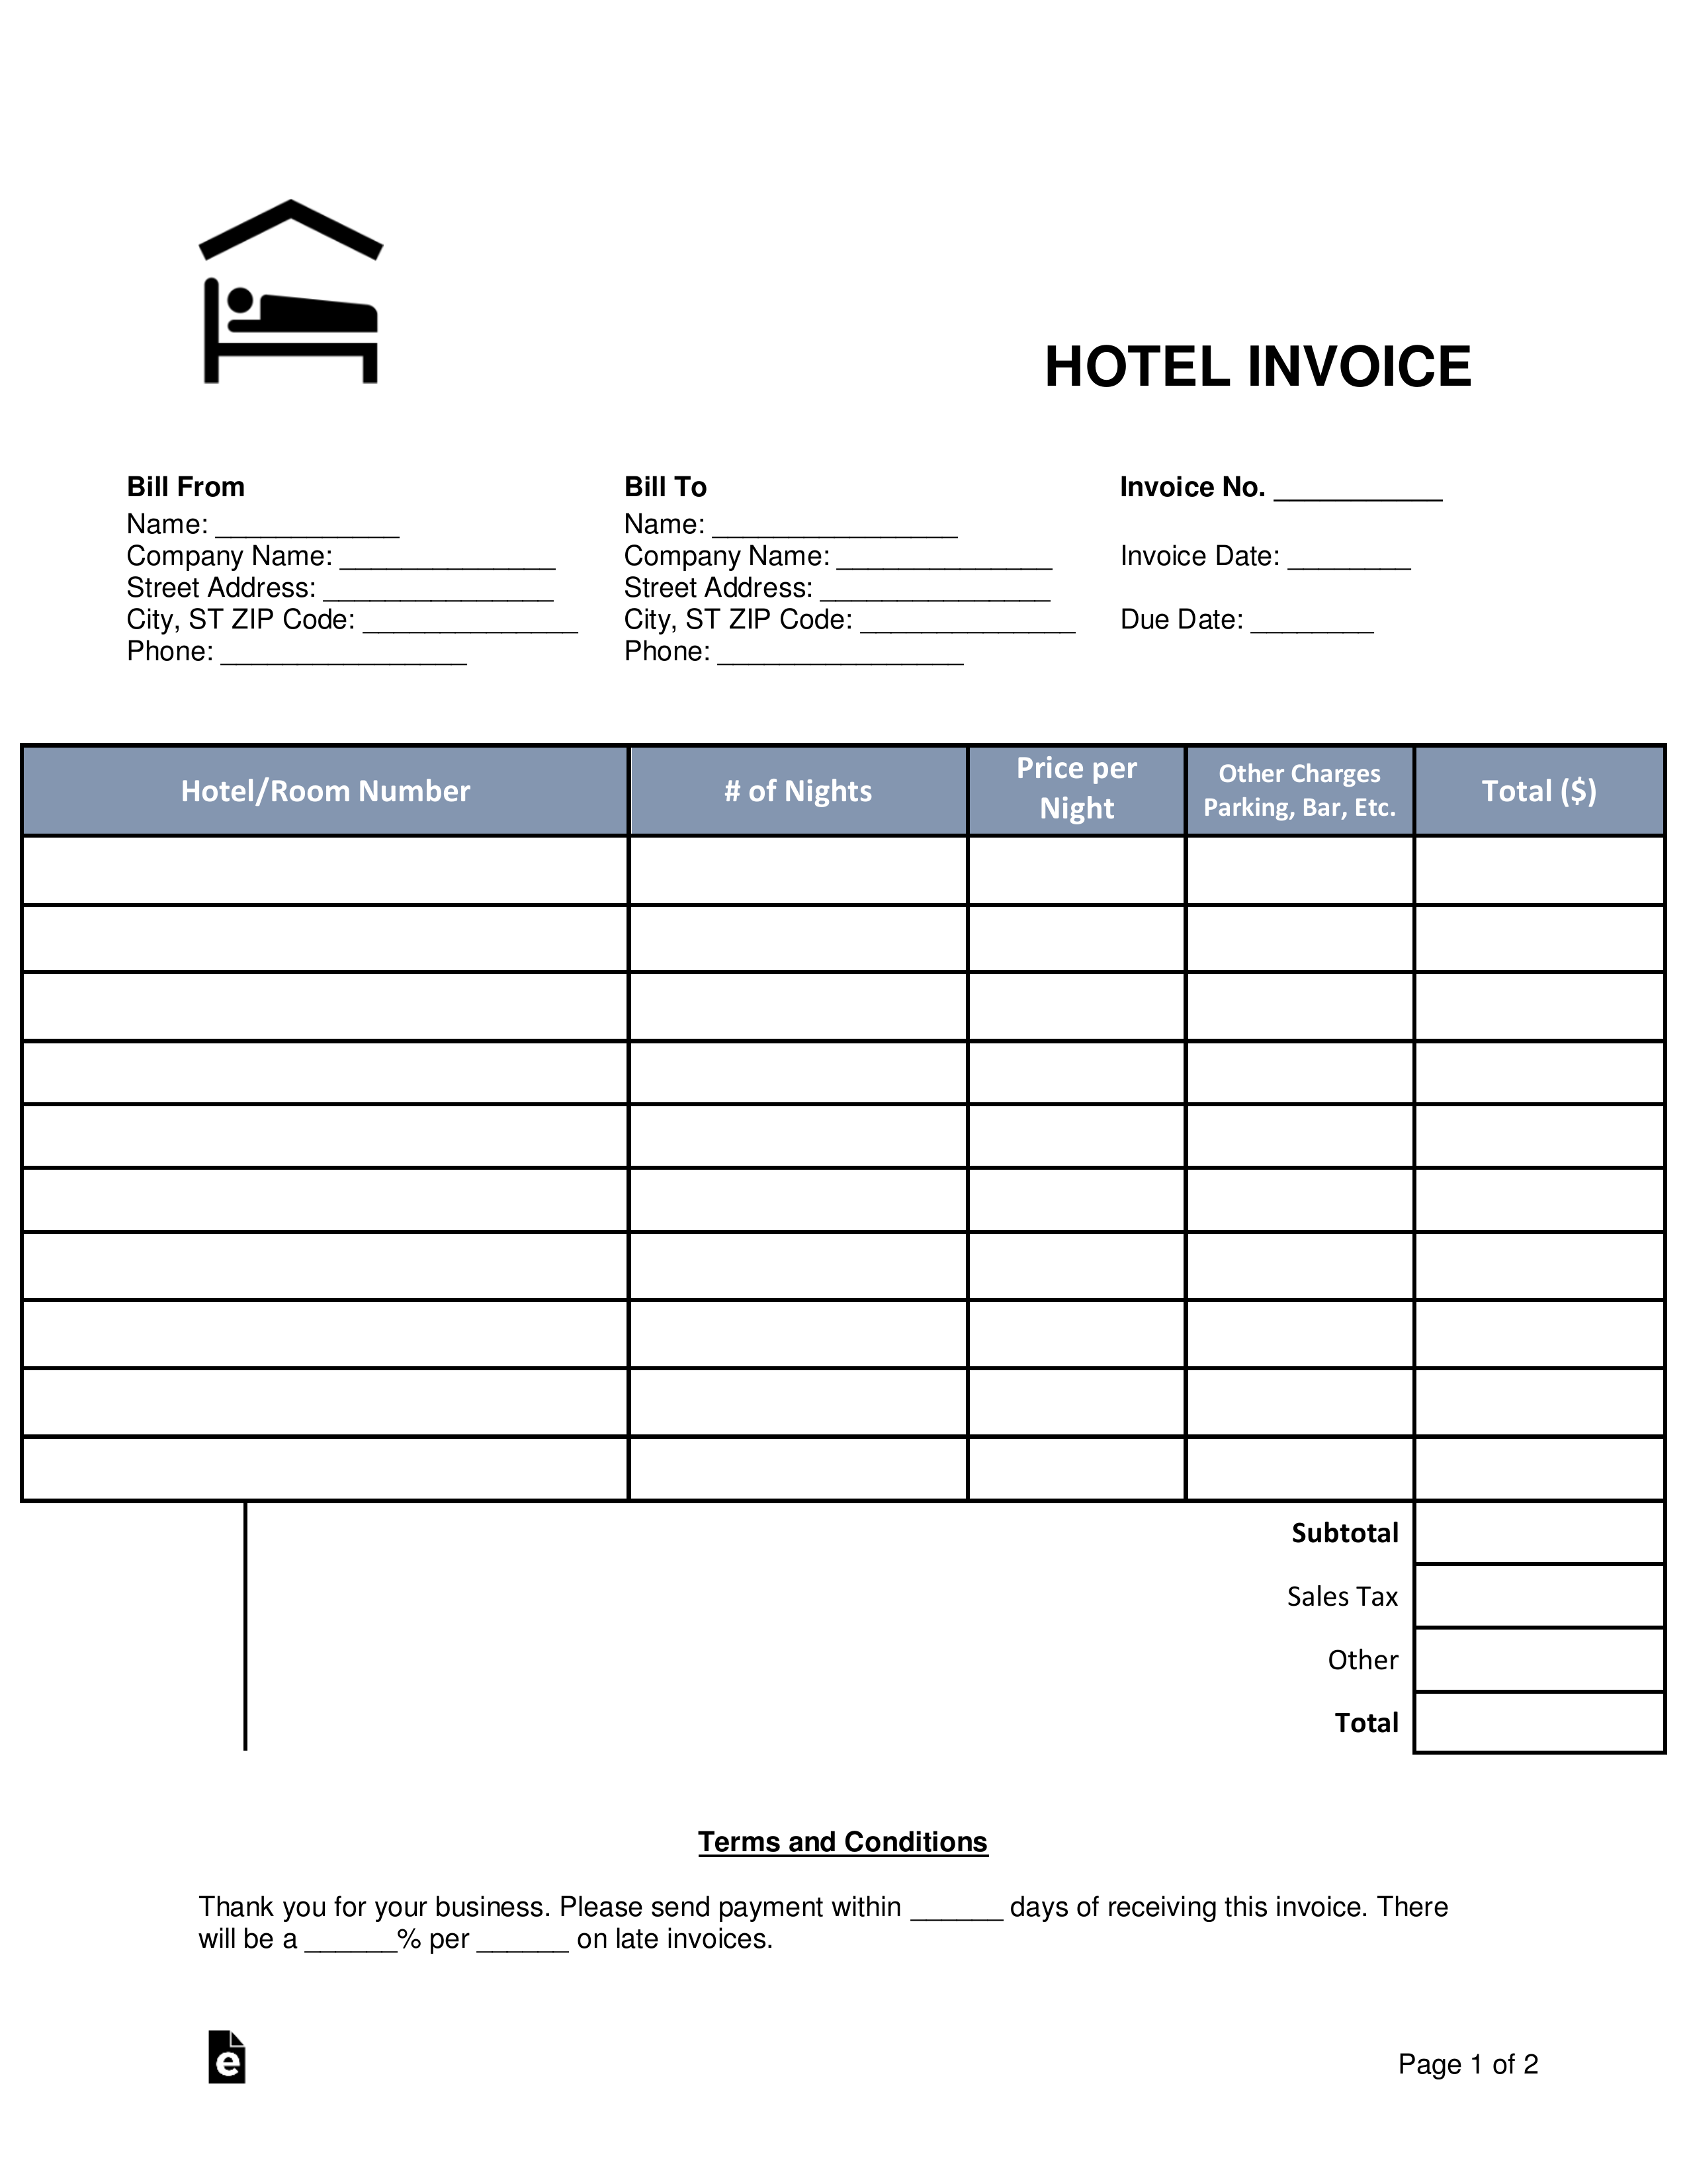 Free Hotel Invoice Receipt Template Word Pdf Eforms